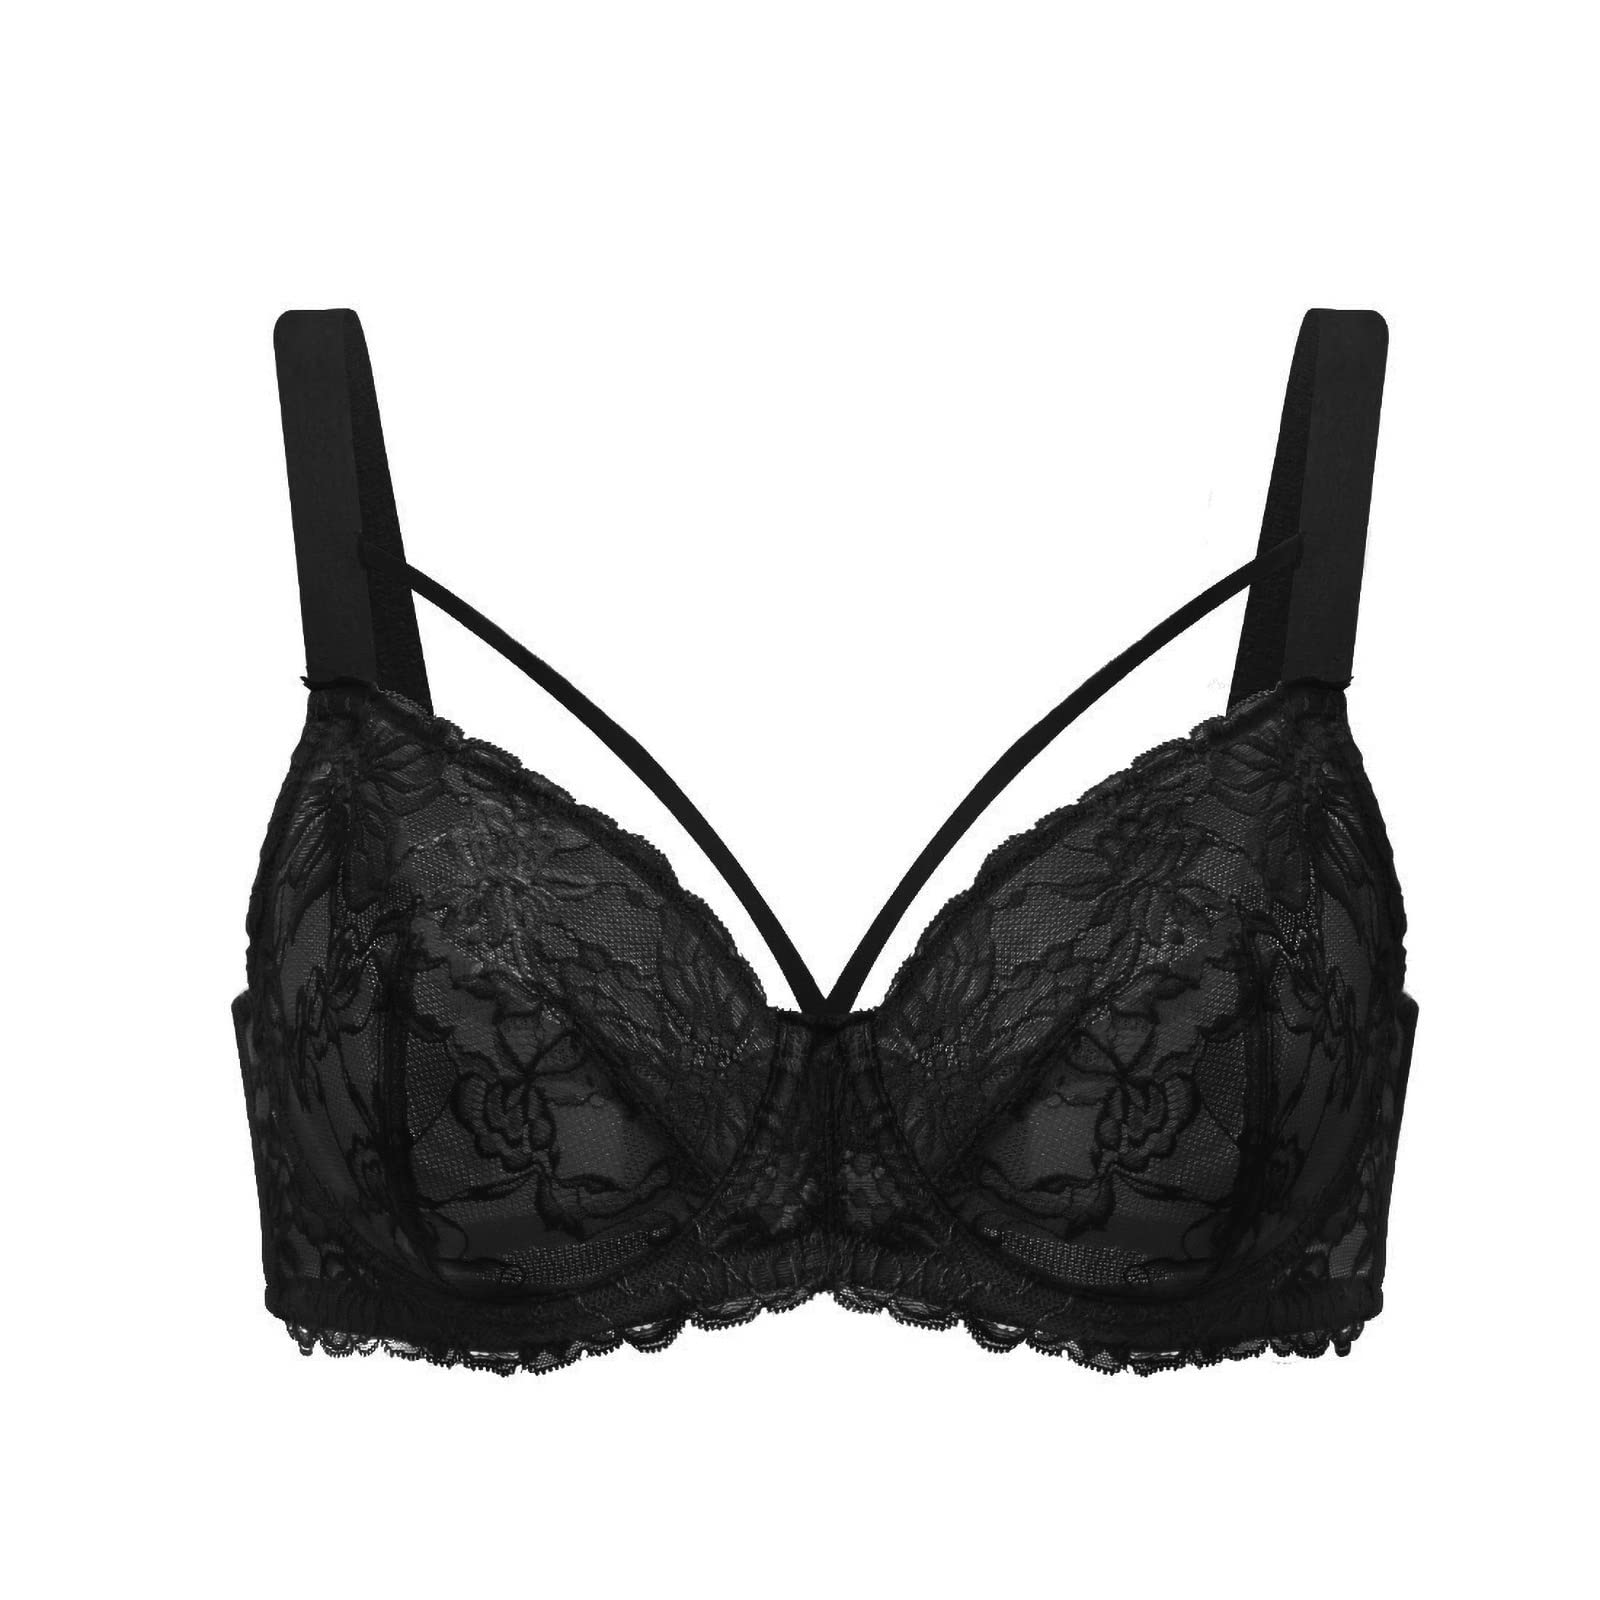 HSIA Minimizer Bra for Women,Unlined Non Padded Lace Sexy Plus Size Bras  Full Figure Black Bras